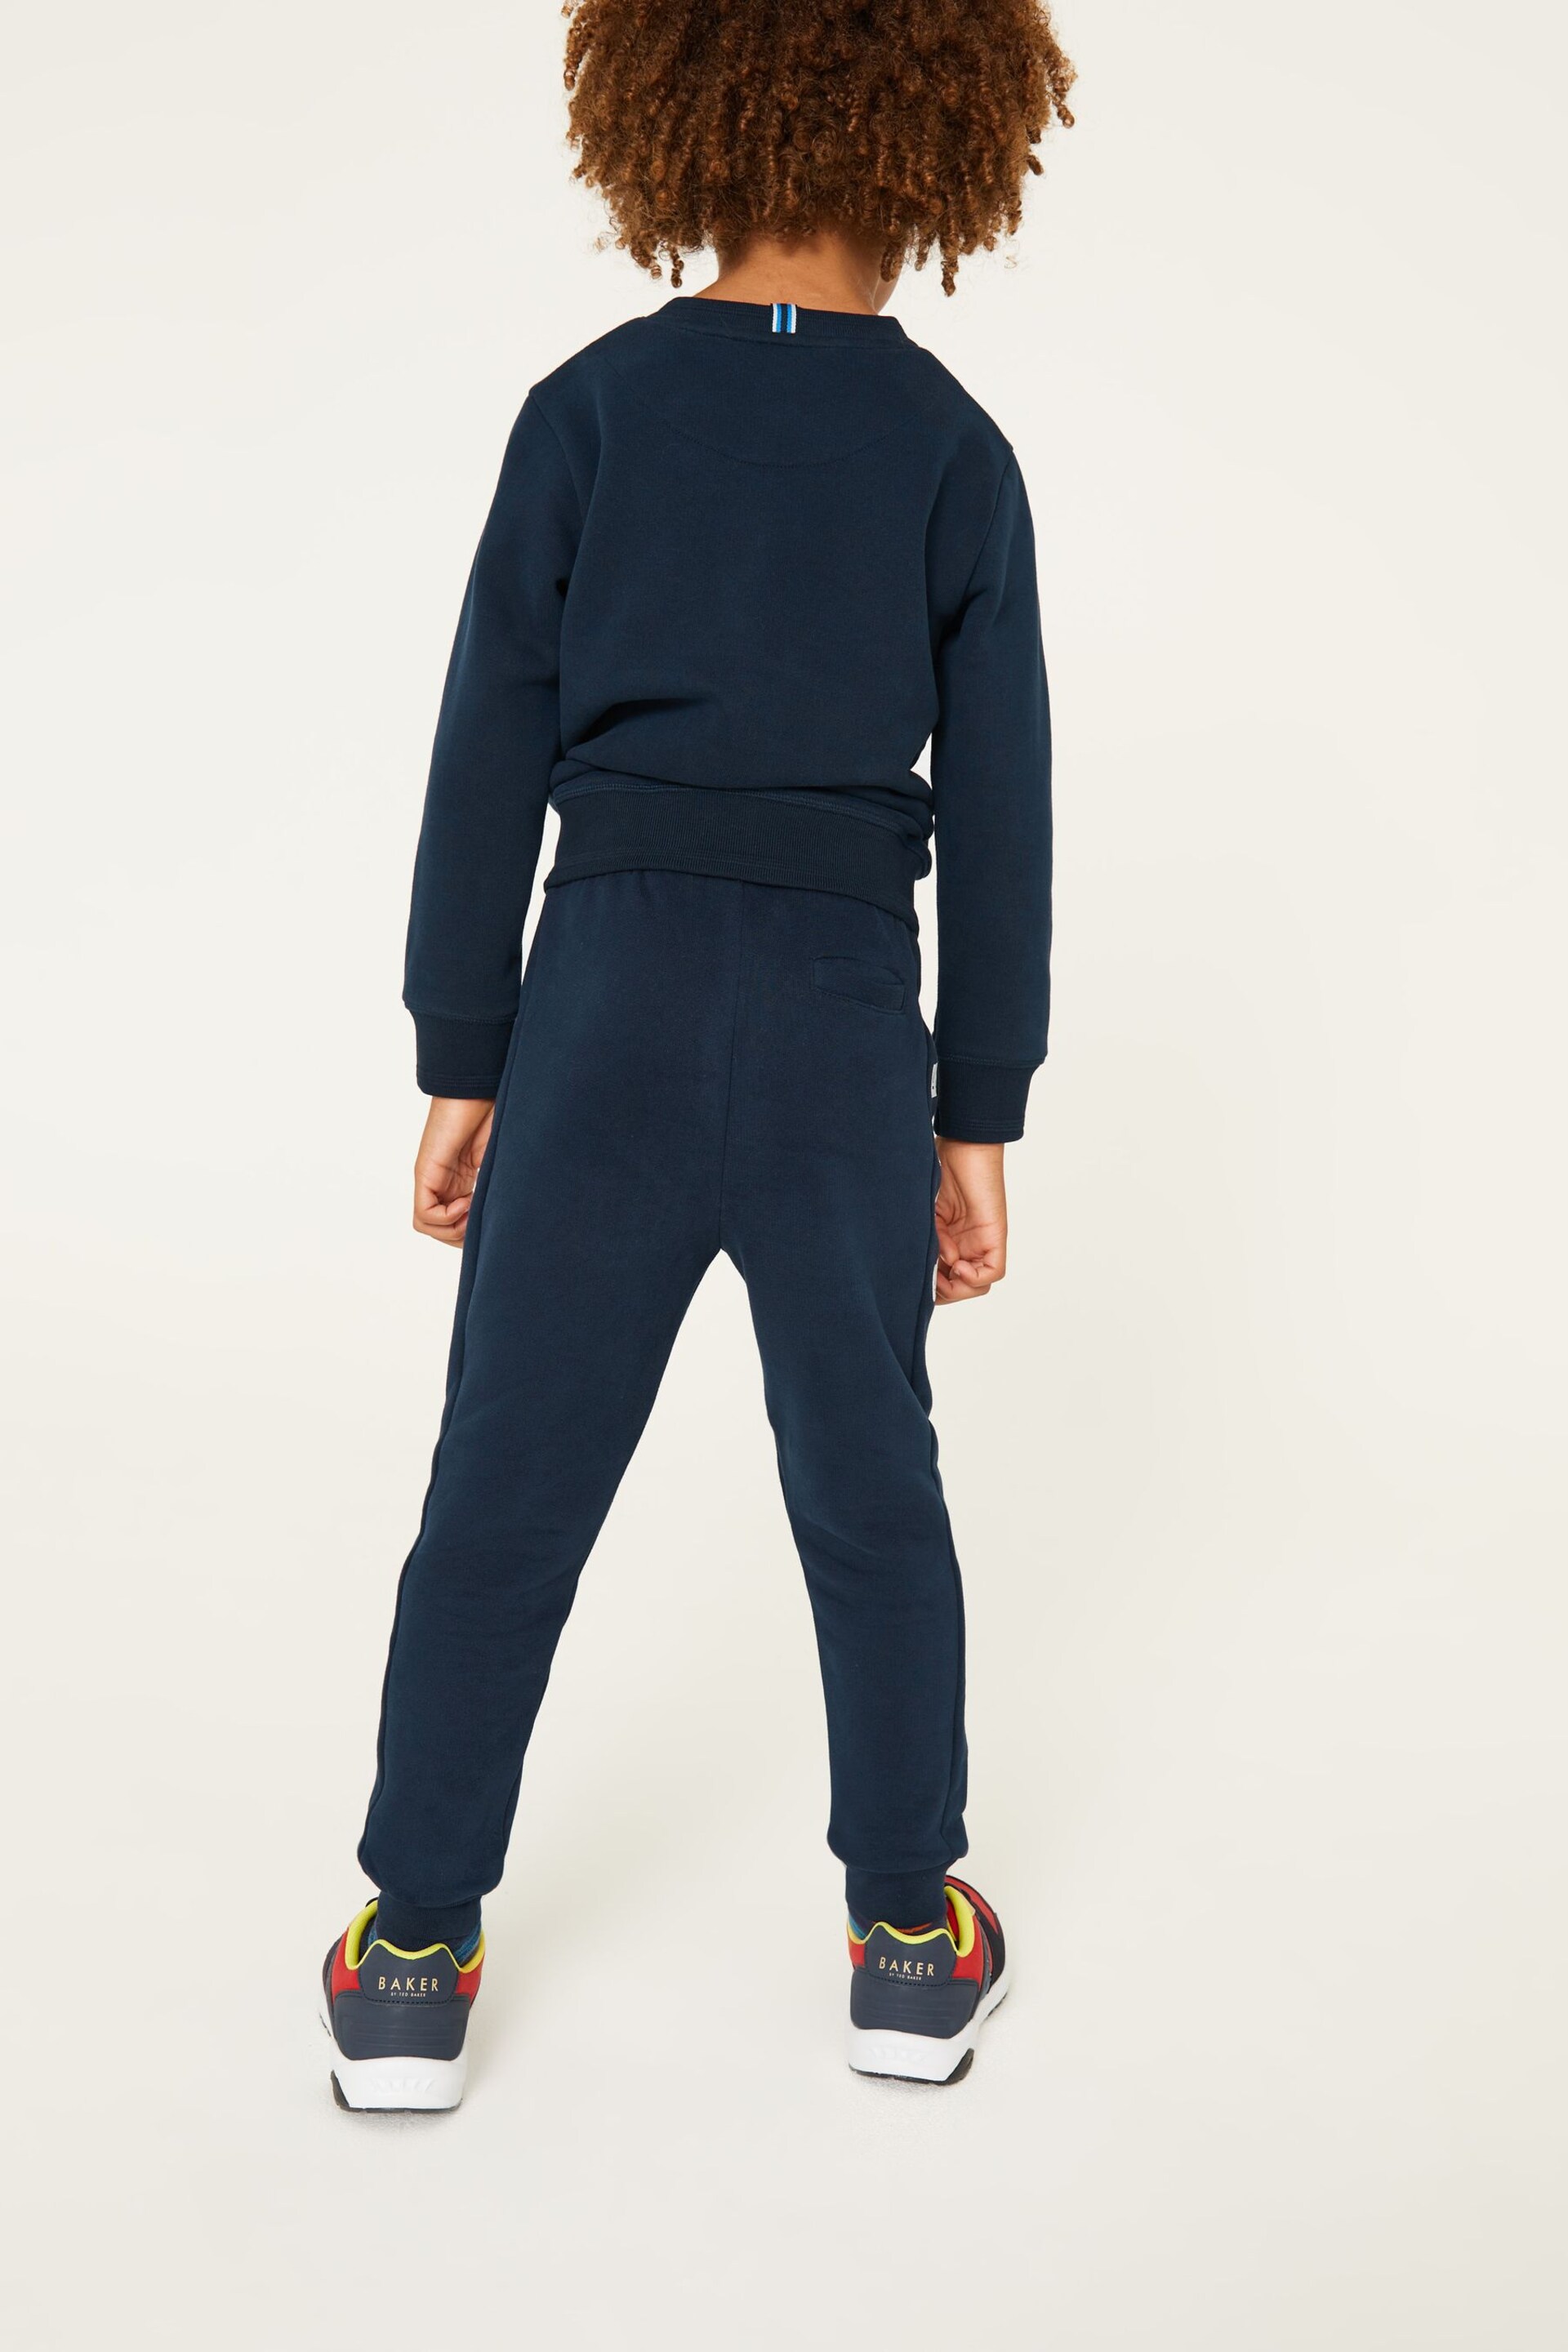 Baker by Ted Baker Joggers - Image 2 of 10